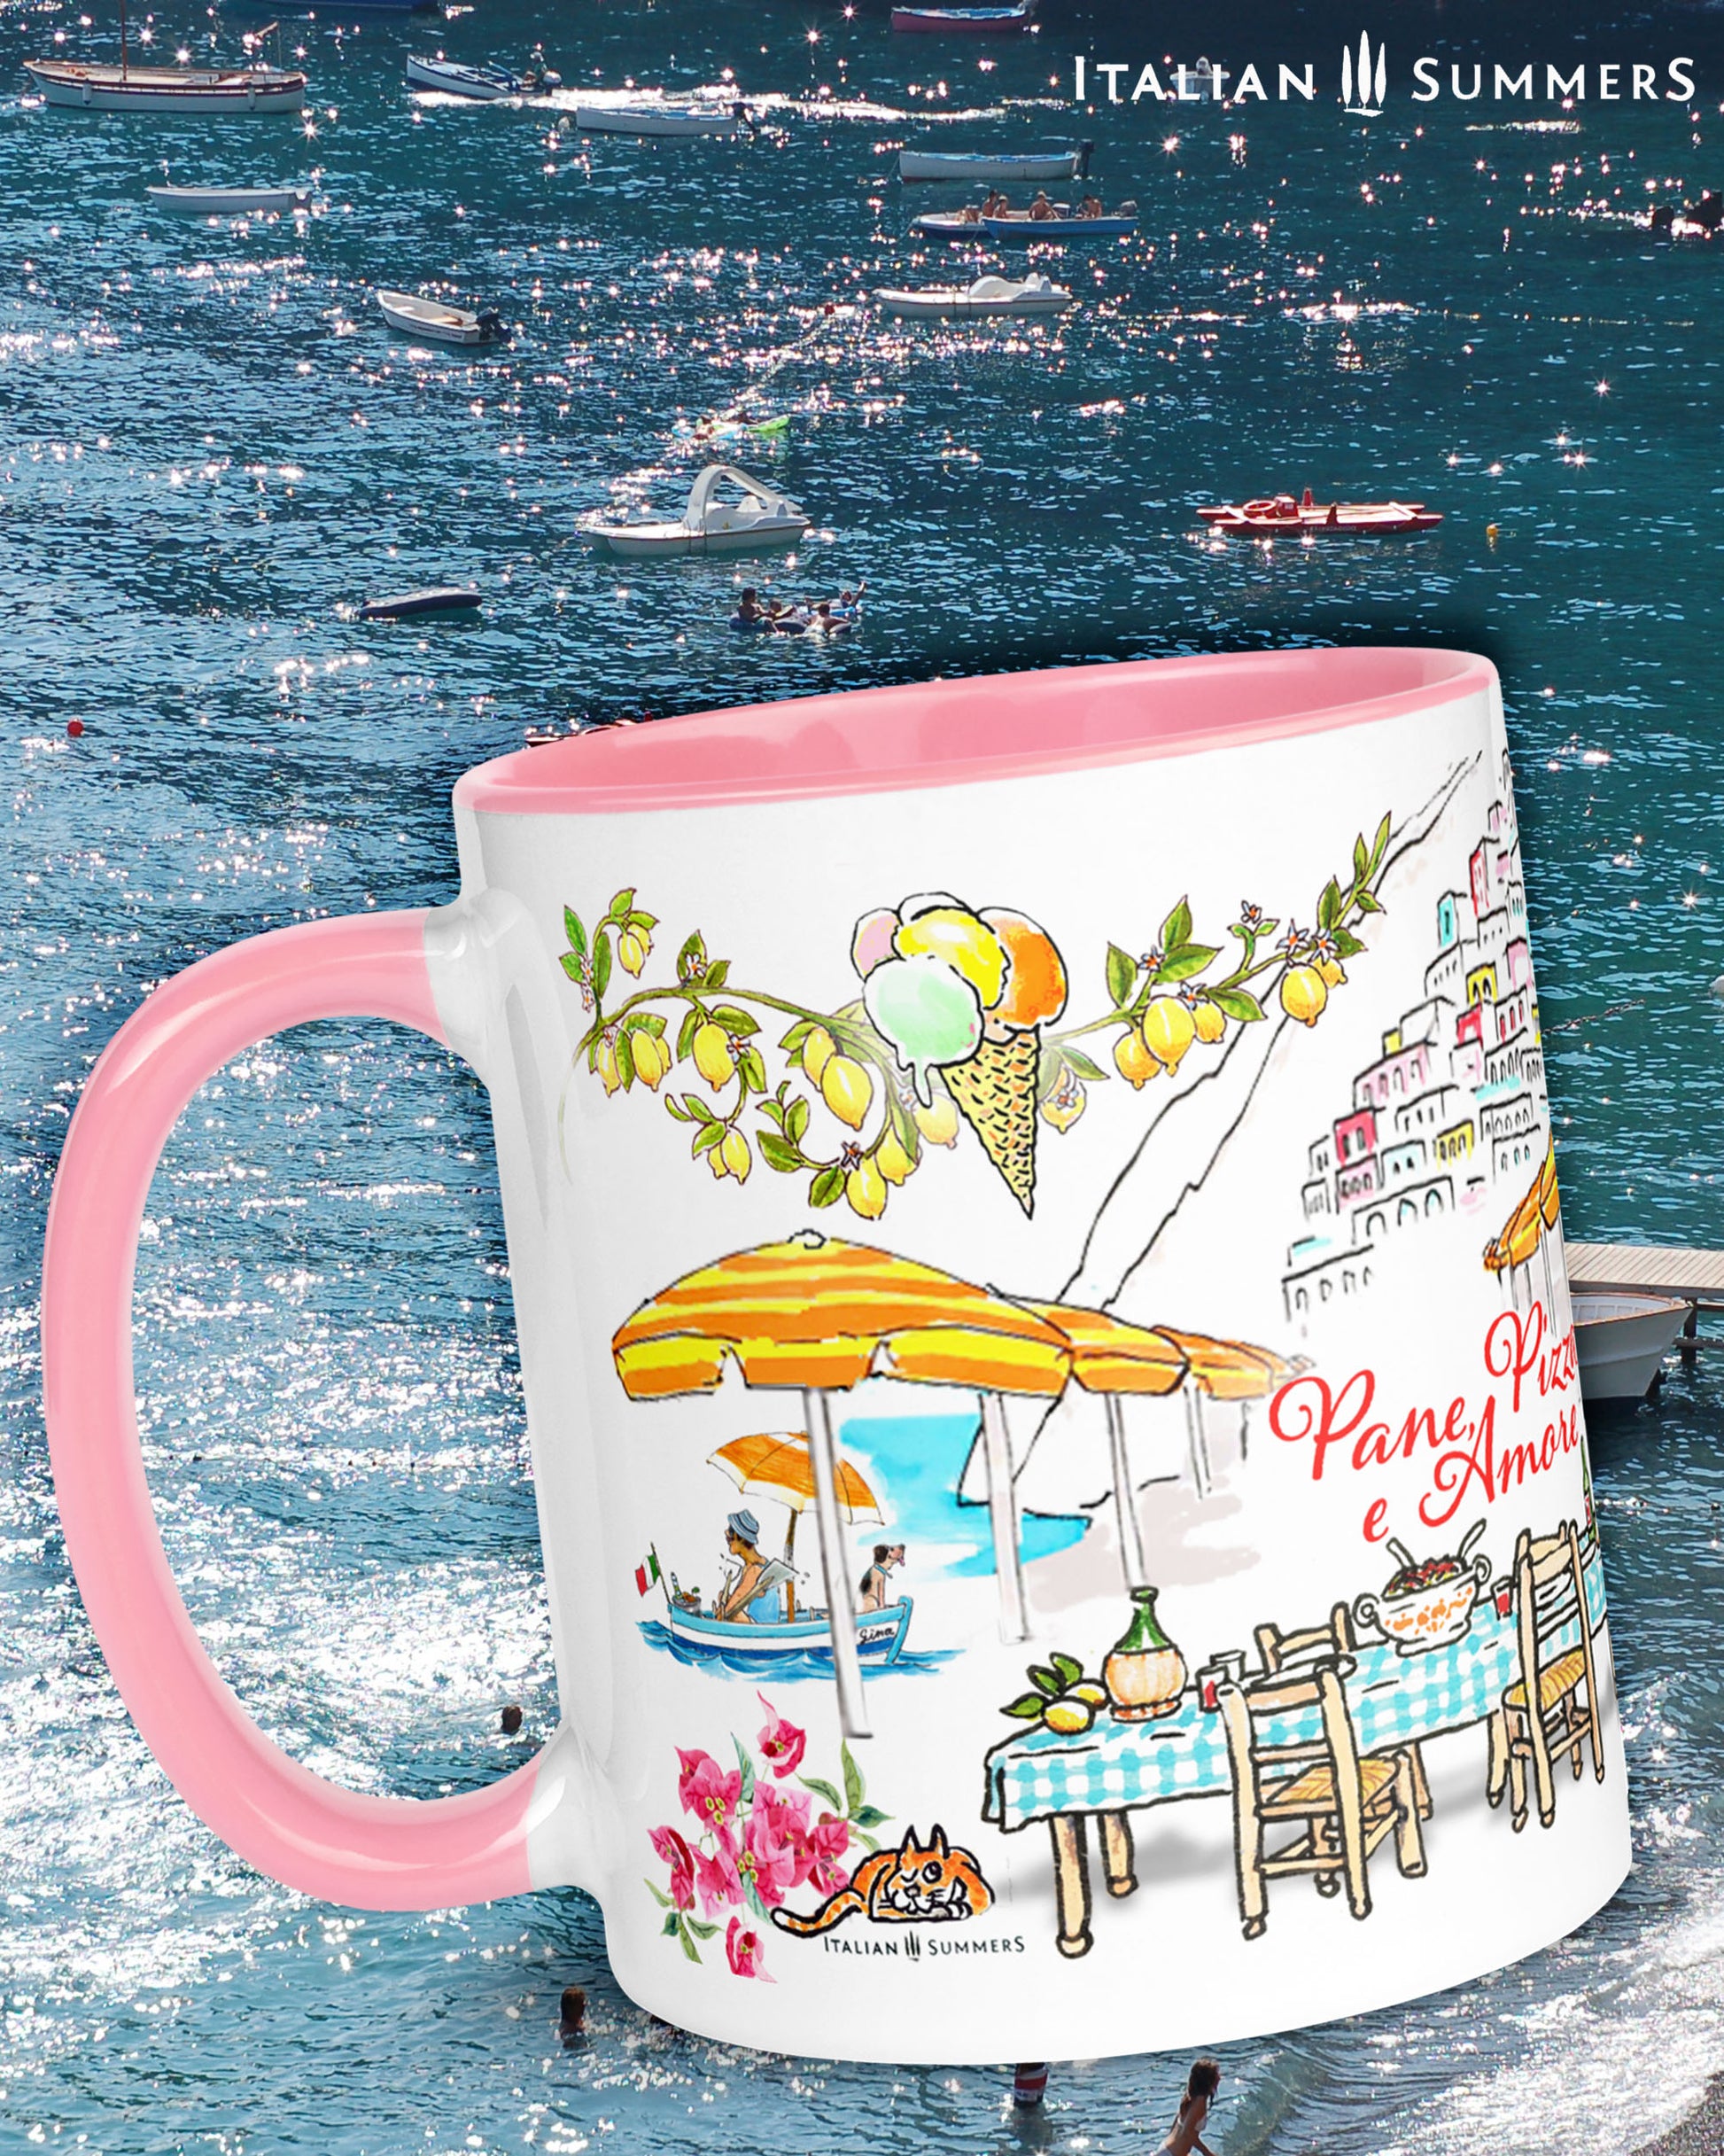 A made to order mug decorated with a print of colorful beach umbrellas on the Amalfi coast, two glasses with a red drink and straws clinking together, and a colorful sketch of Positano in the backround. A texts states: See you in the Piazza